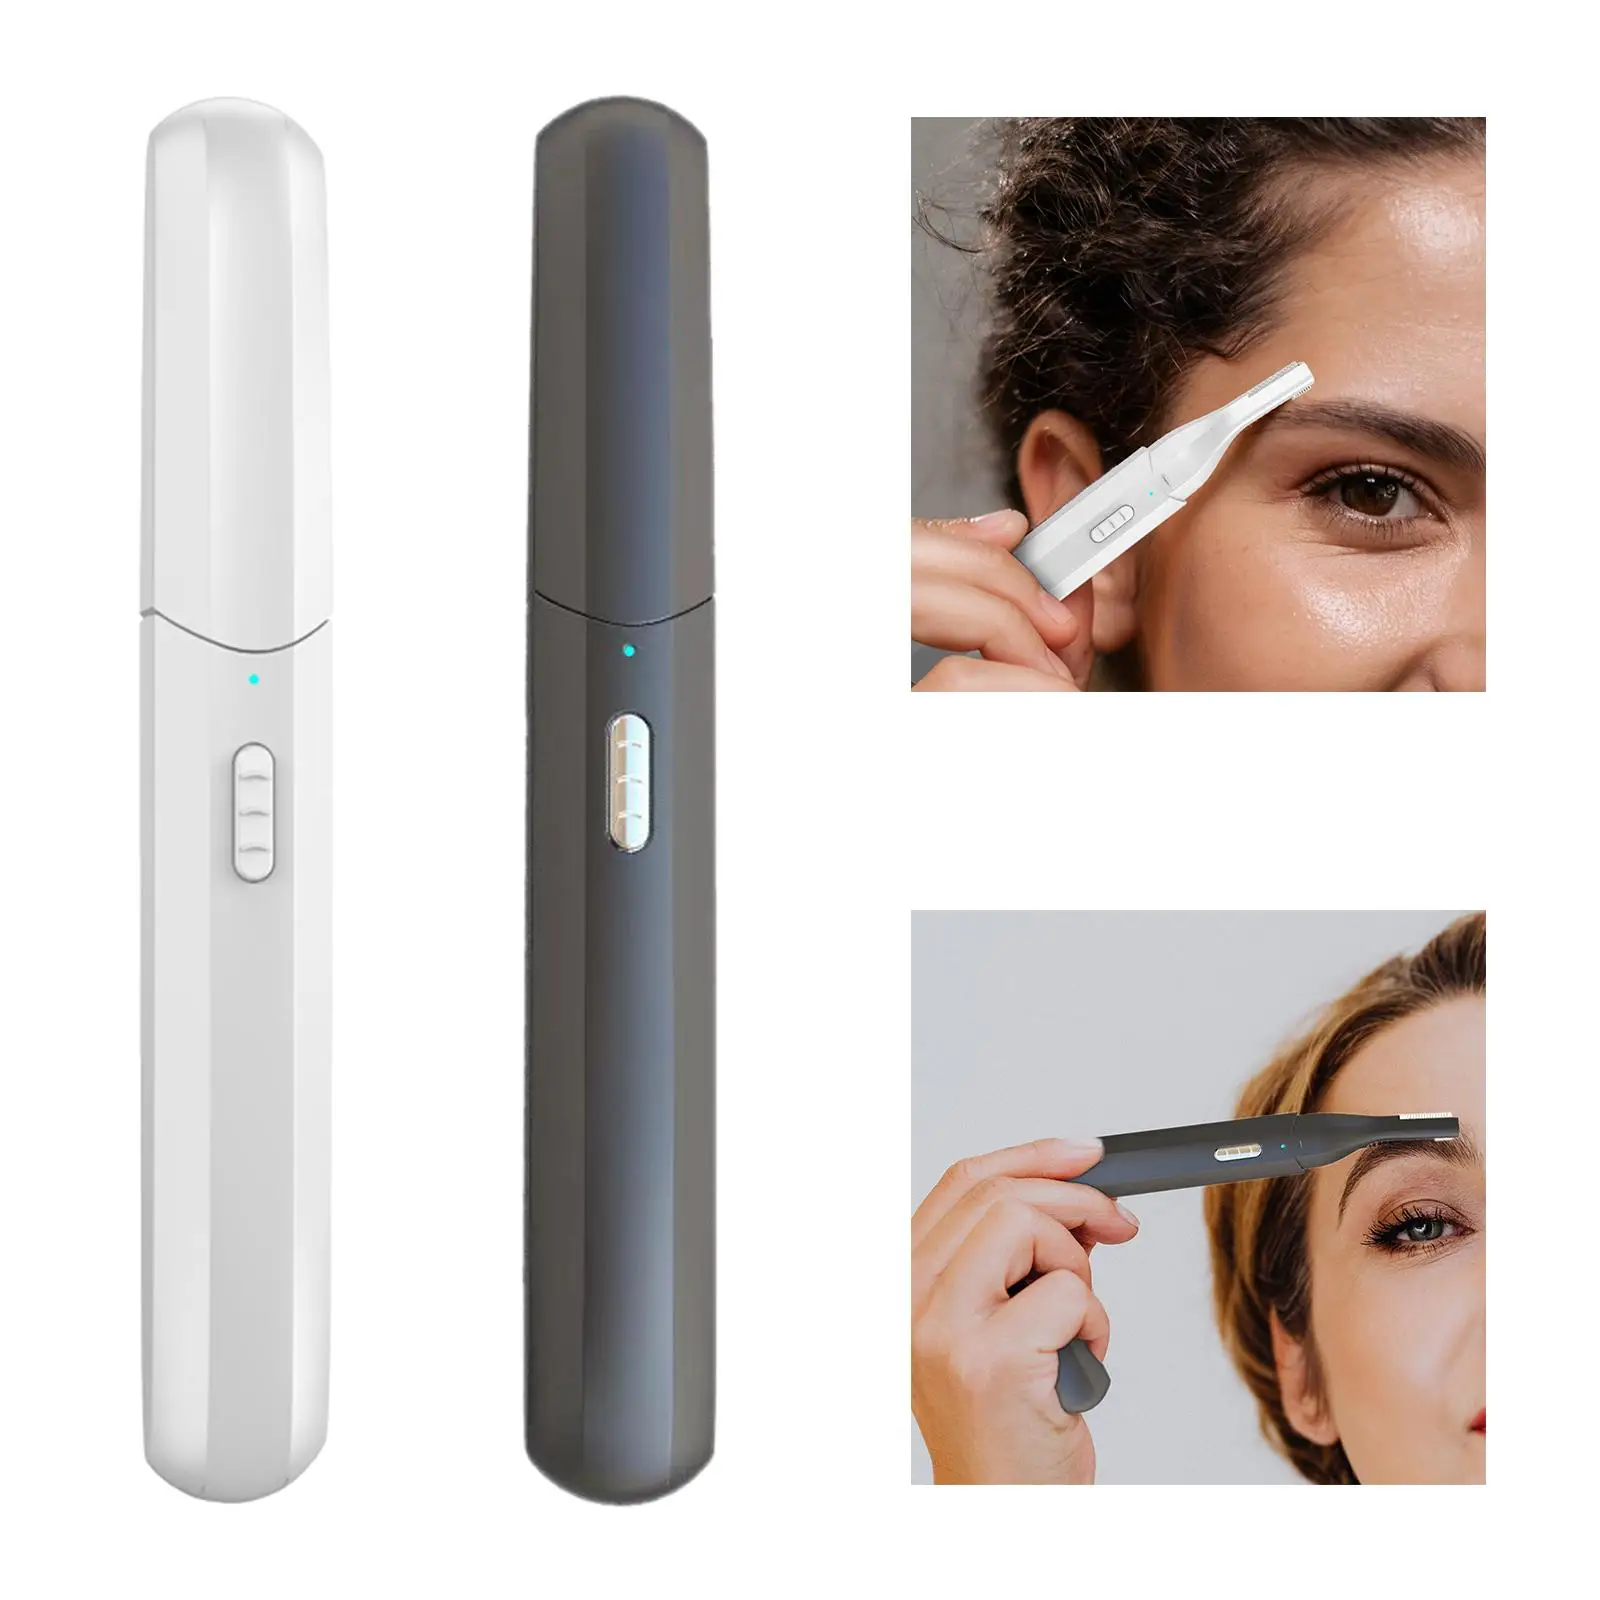 USB Charging Electric Eyebrow trimming Hair Removal Tool Precision Cutting with Dual Cutter Head Portable for Legs